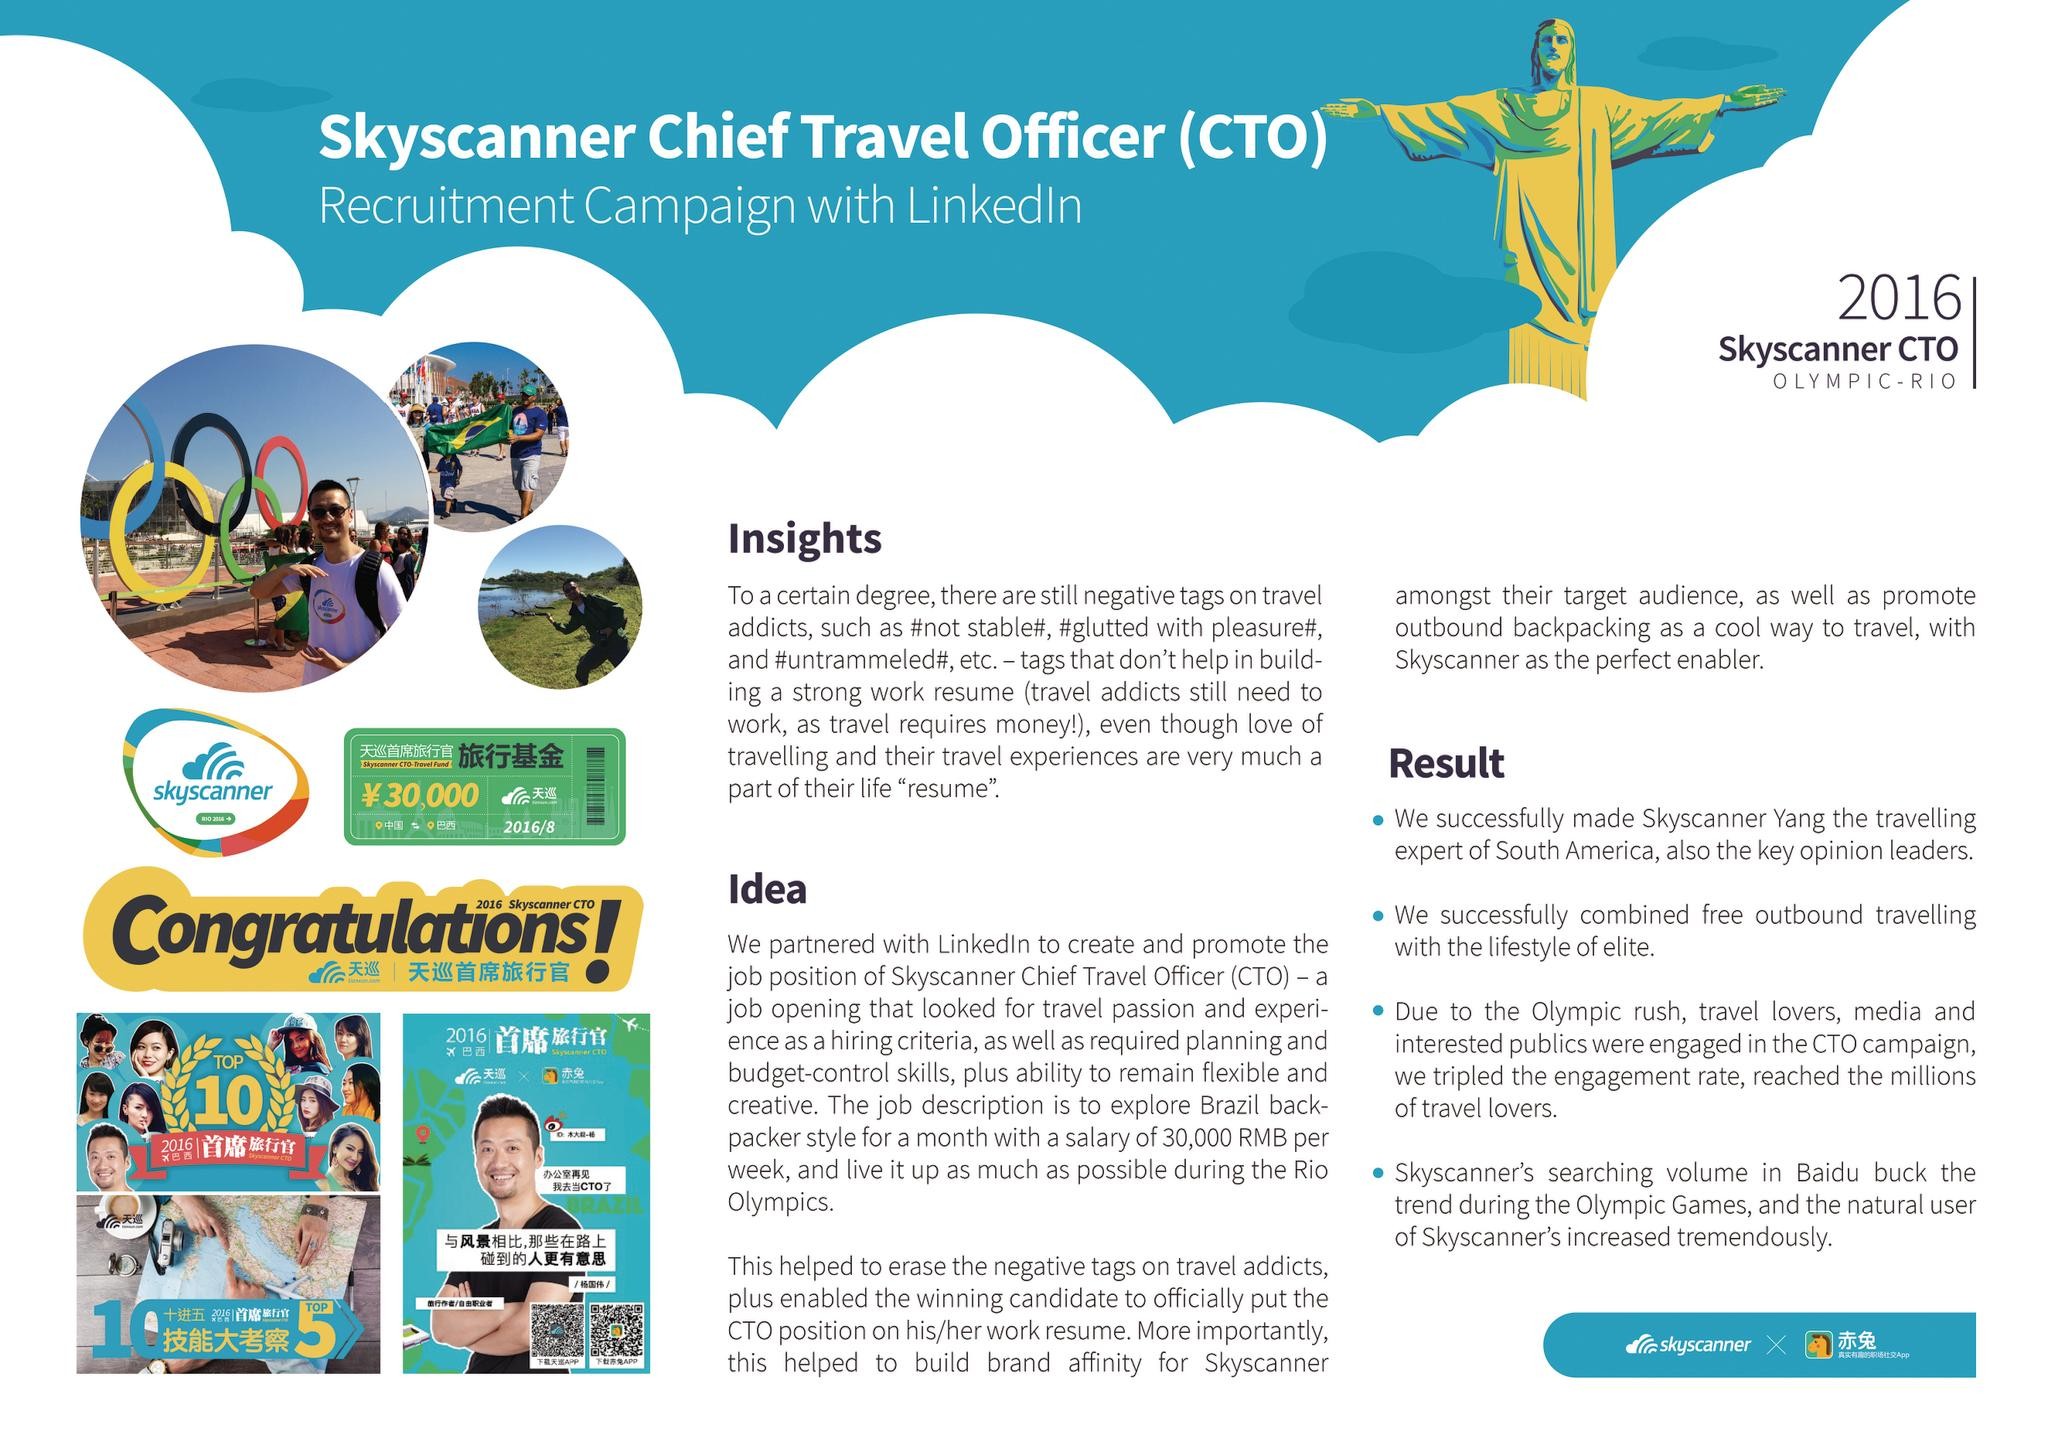 Skyscanner Chief Travel Officer (CTO) Recruitment Campaign with LinkedIn